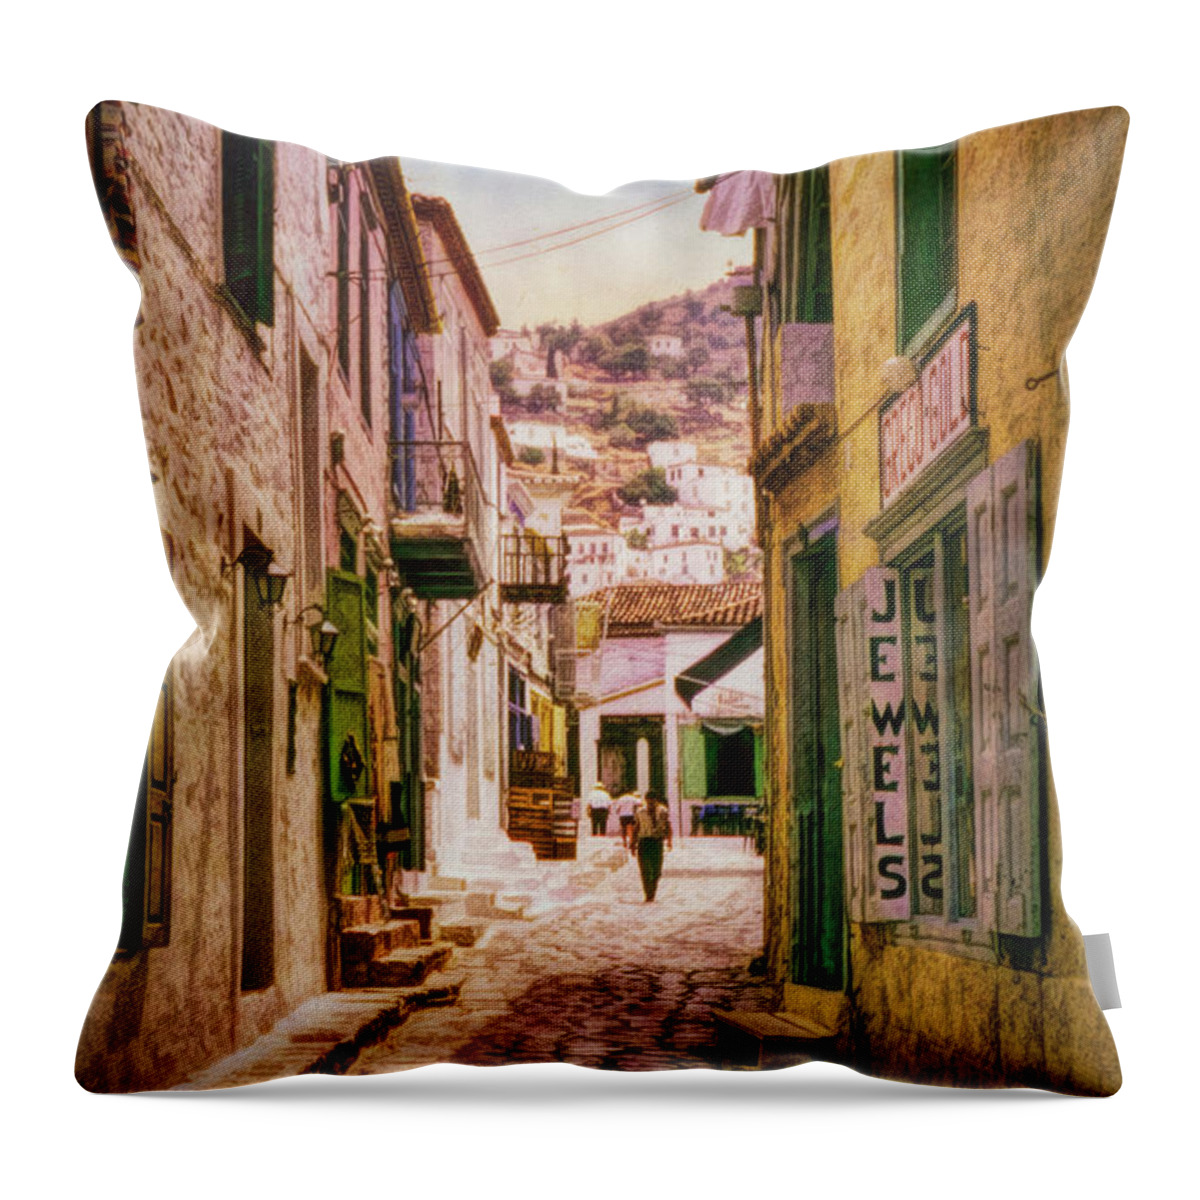 Crete Throw Pillow featuring the digital art An alley in Crete by Frank Lee